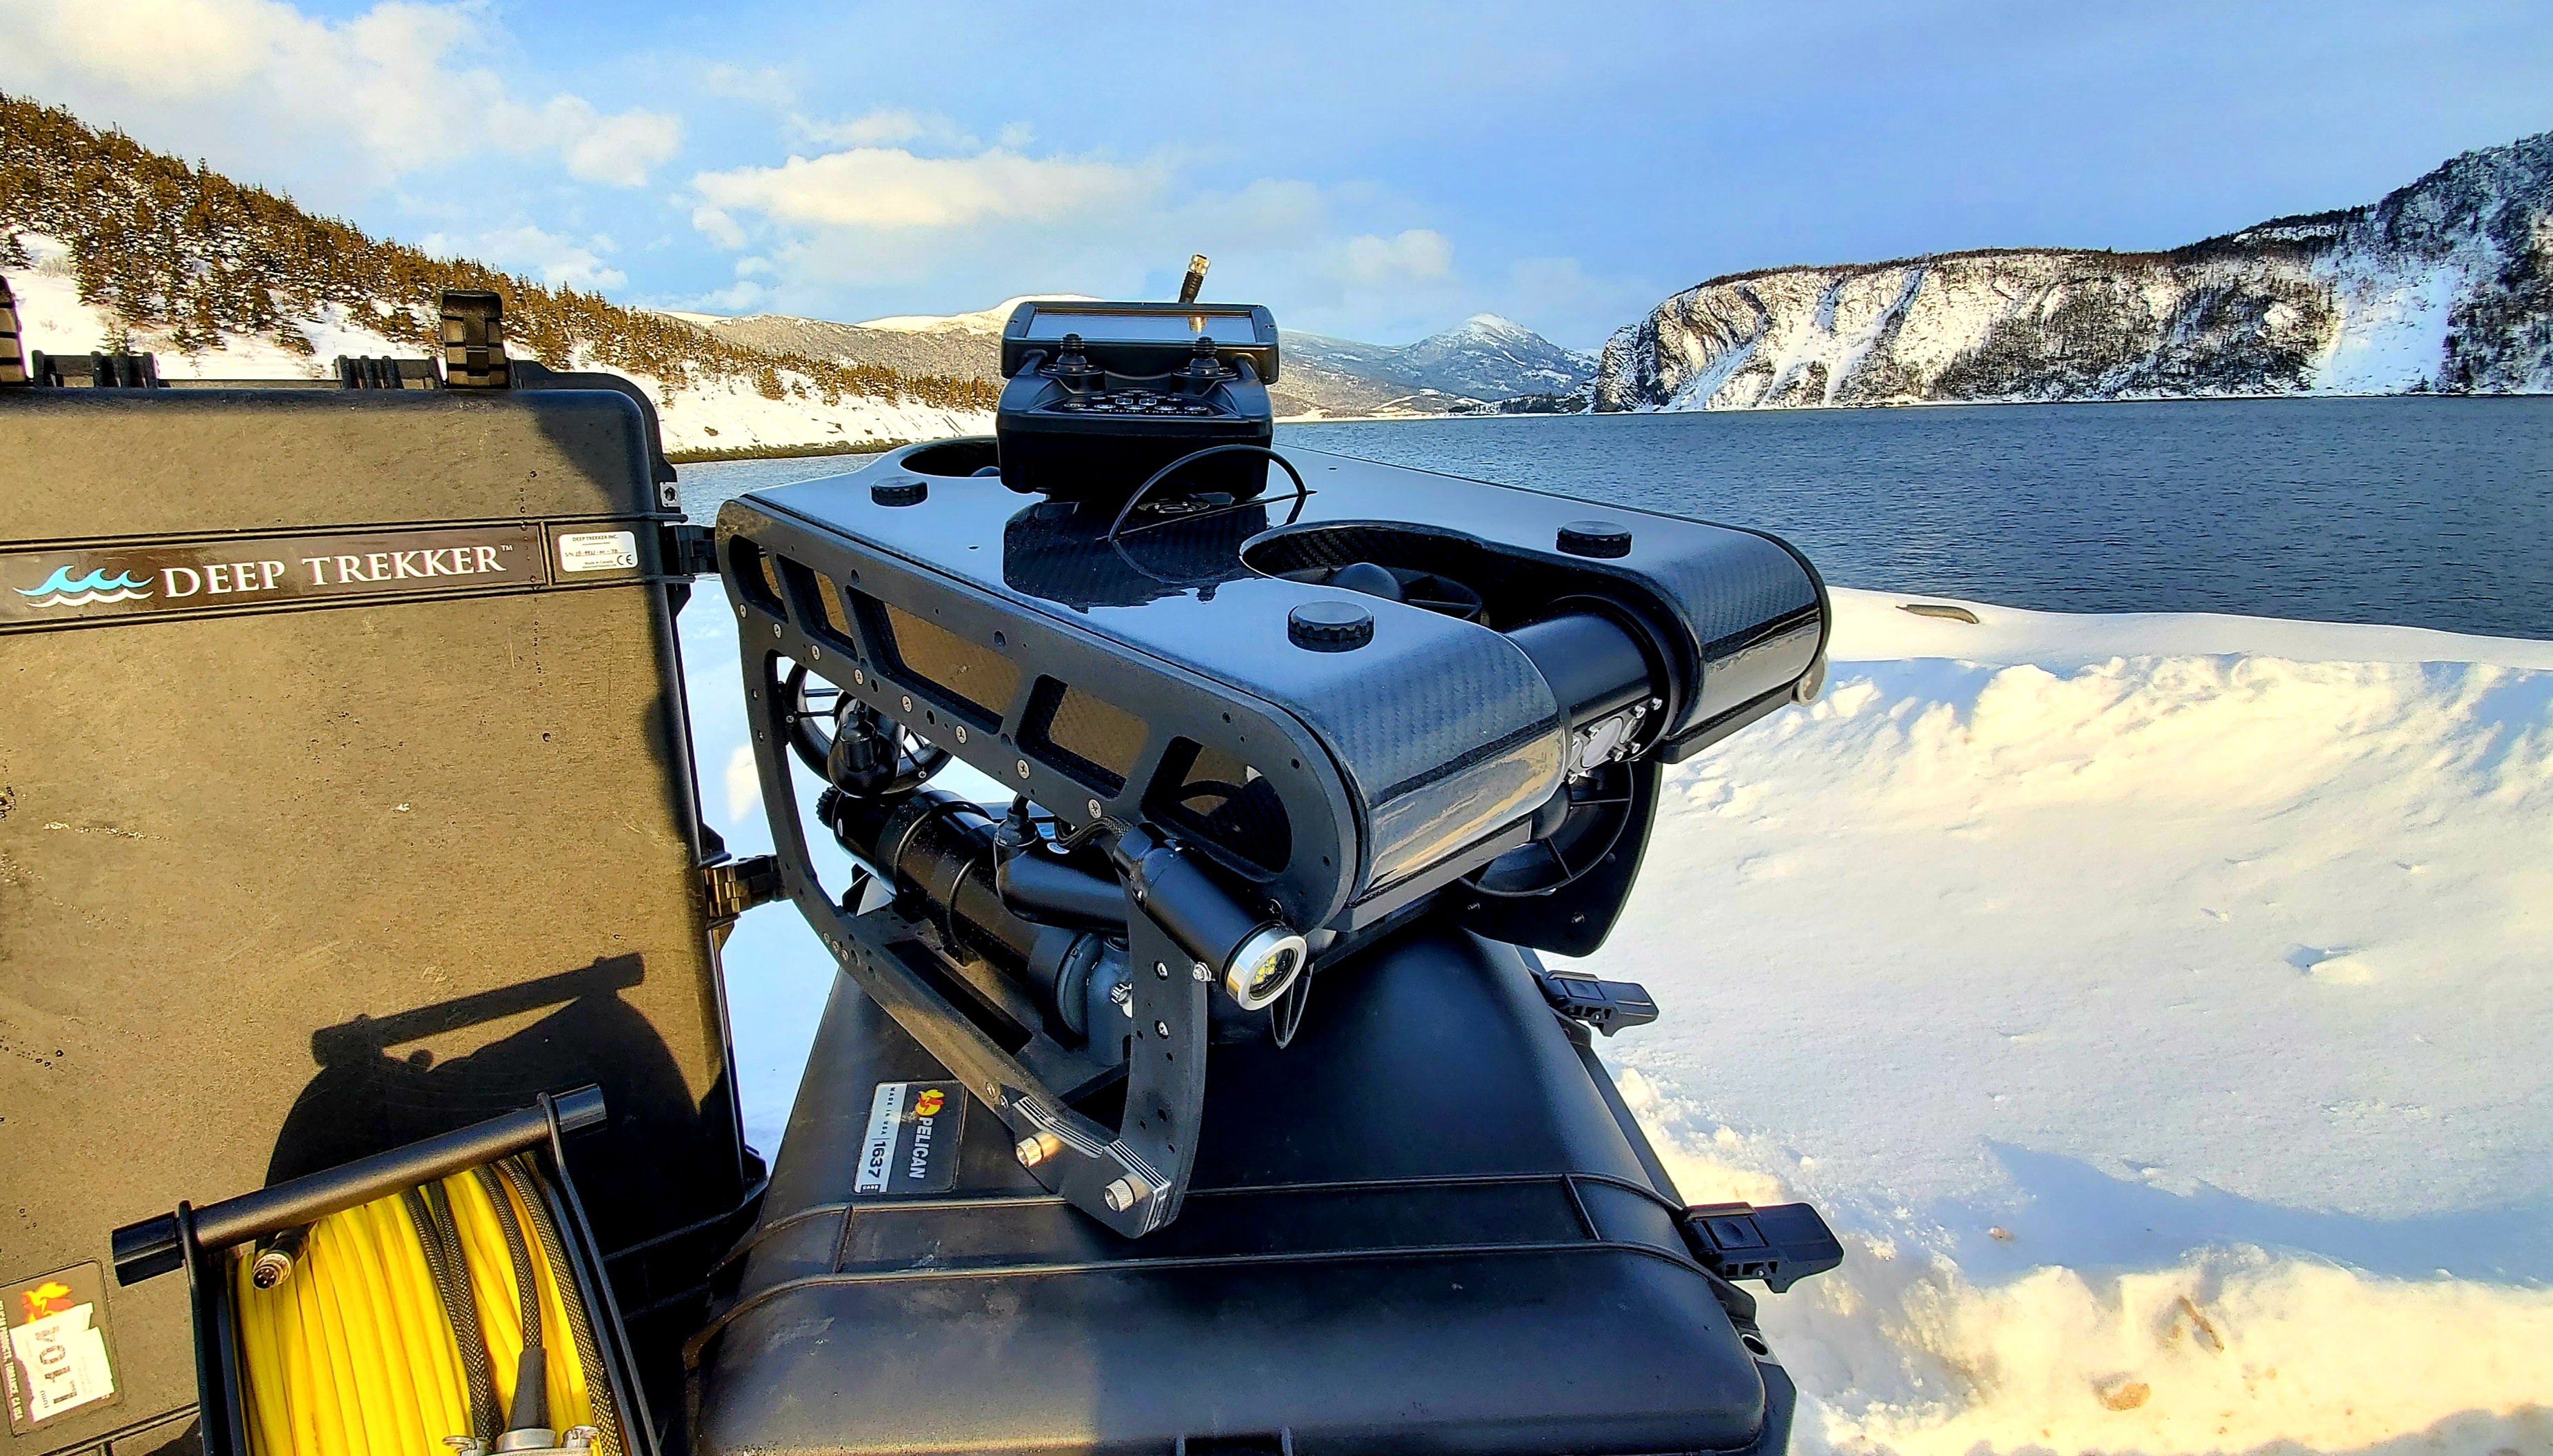 A ROV system is seen, with a snow-covered body of water, trees and cliffs in the background.